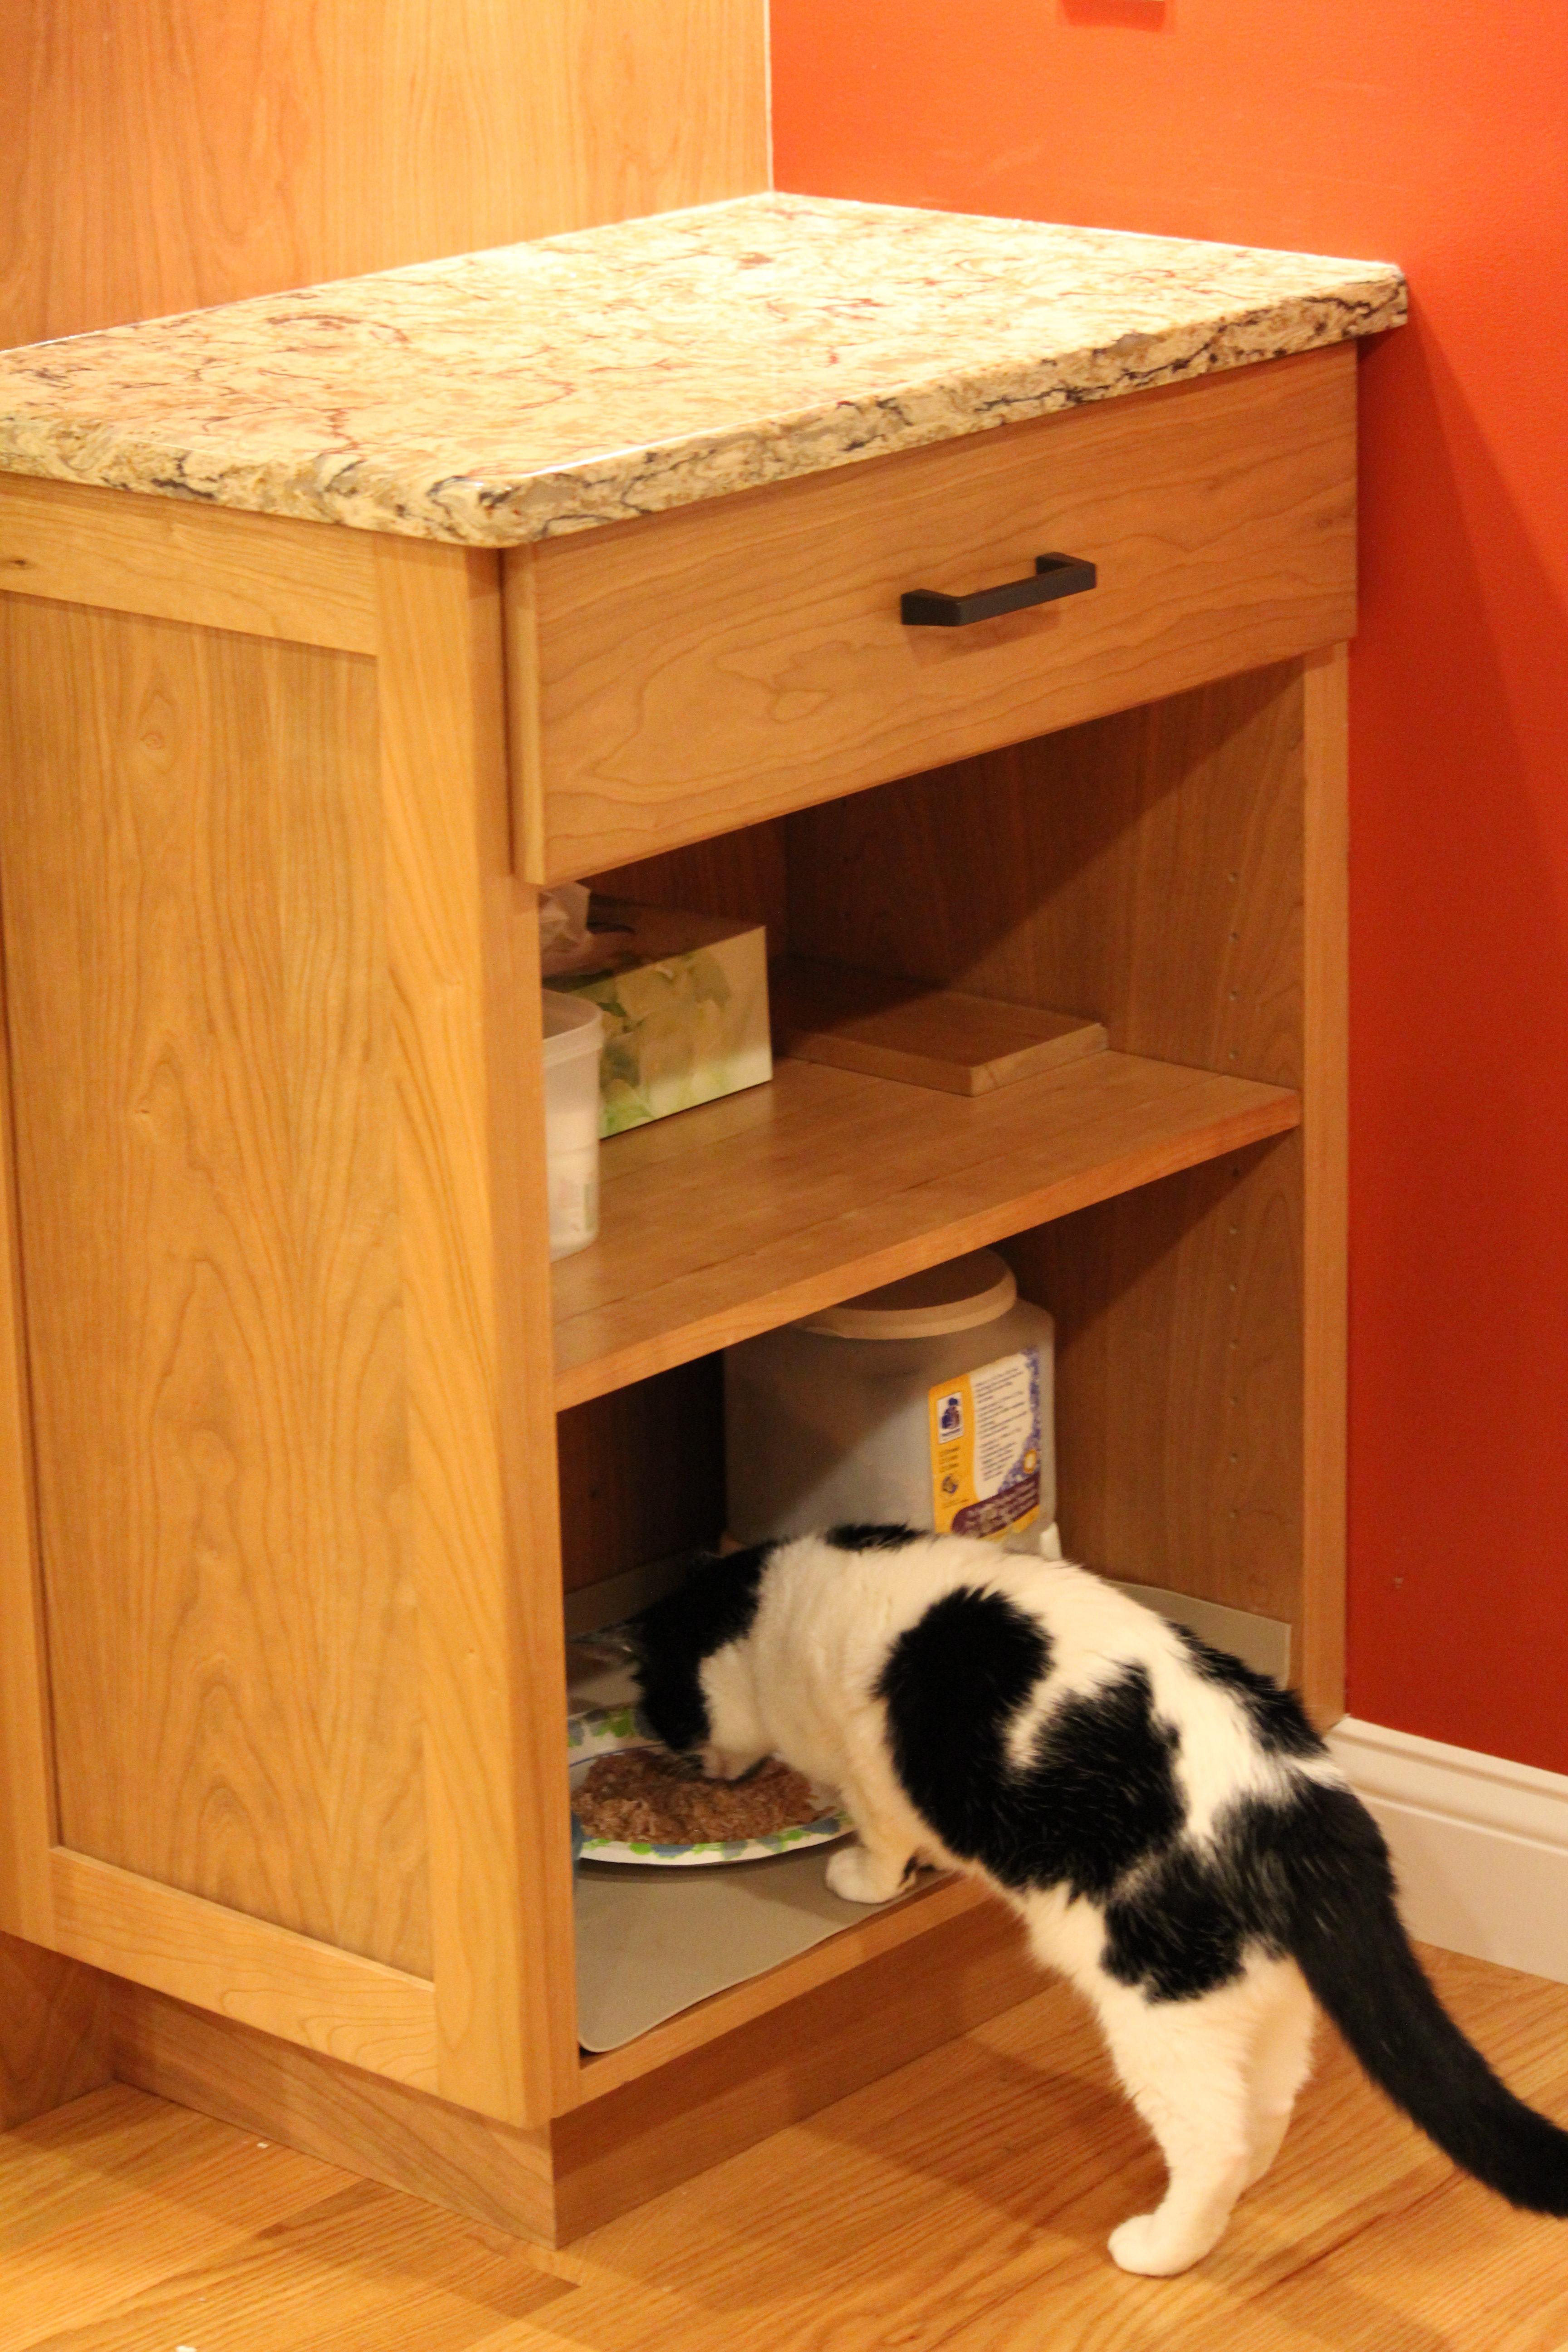 AFTER: EVEN THE CATS HAVE THEIR OWN DINER